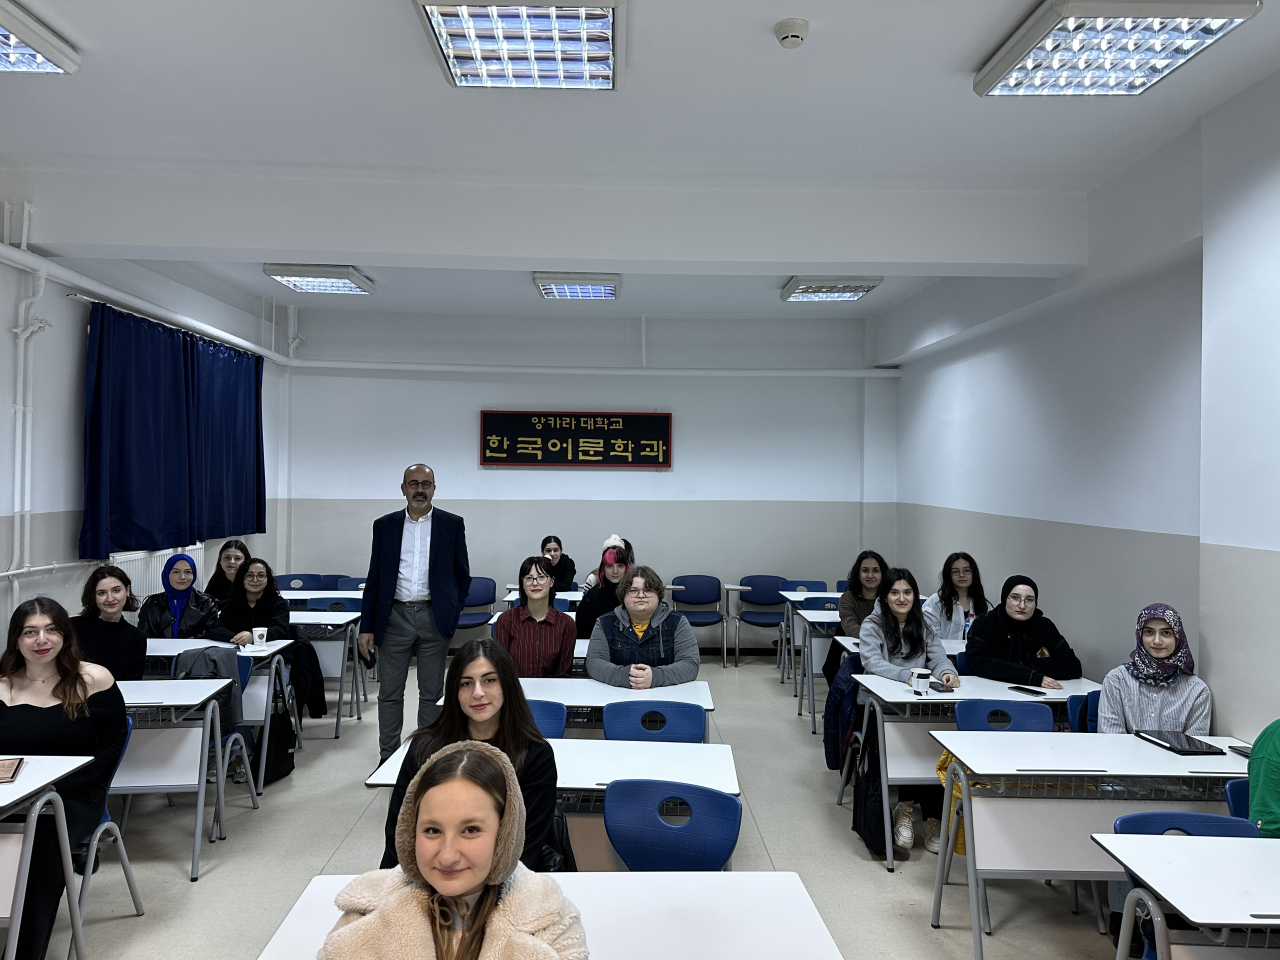 Mahmut Ertan Gokmen (standing), the head of Ankara University’s Department of Korean Language and Literature, poses for a picture with his students. (Ankara University)